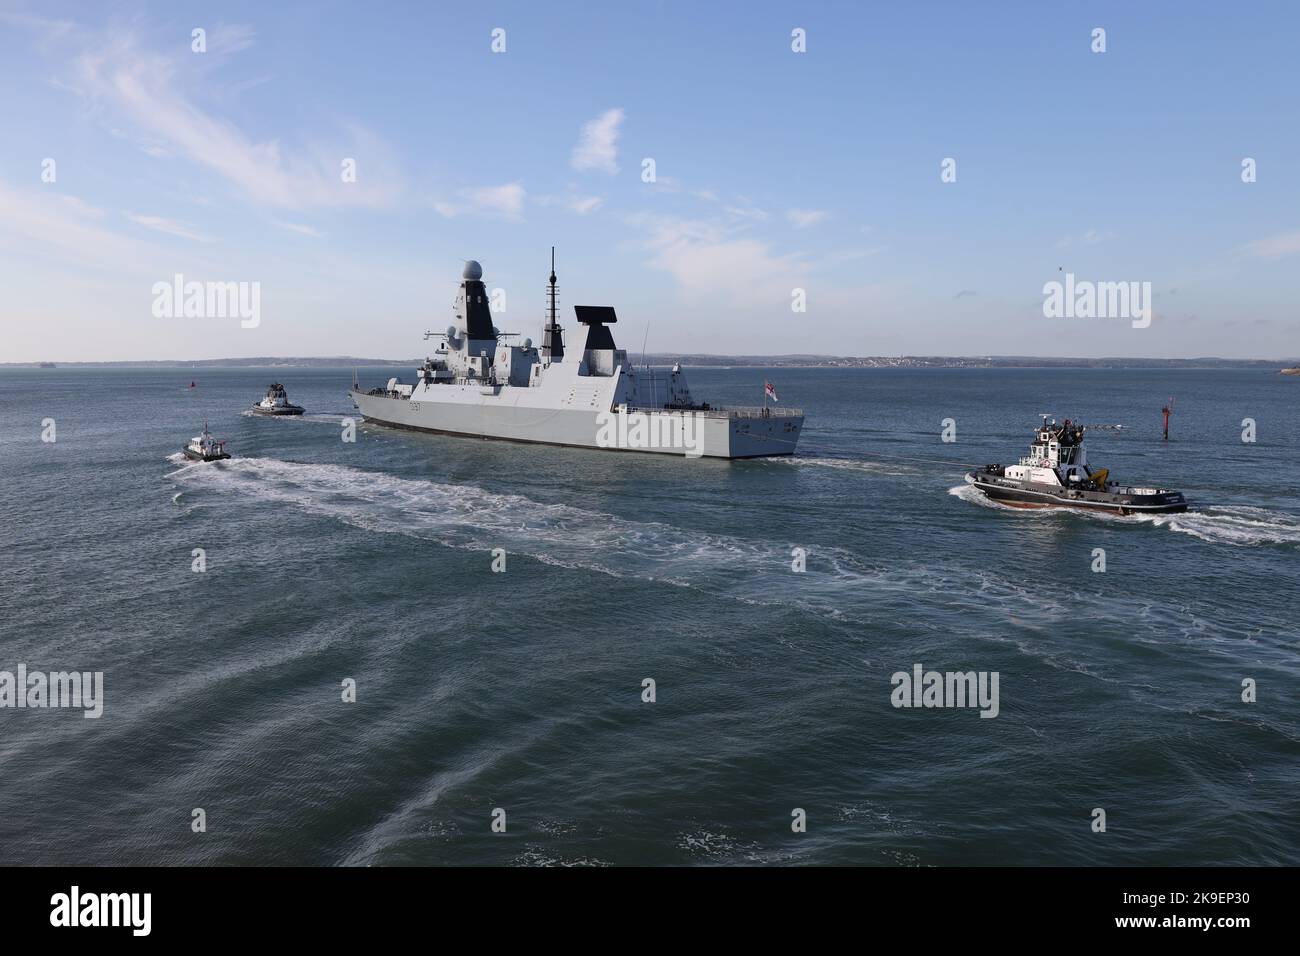 Tugs and the Admiralty pilot launch escort the Royal Navy Type 45 destroyer HMS DUNCAN into The Solent Stock Photo